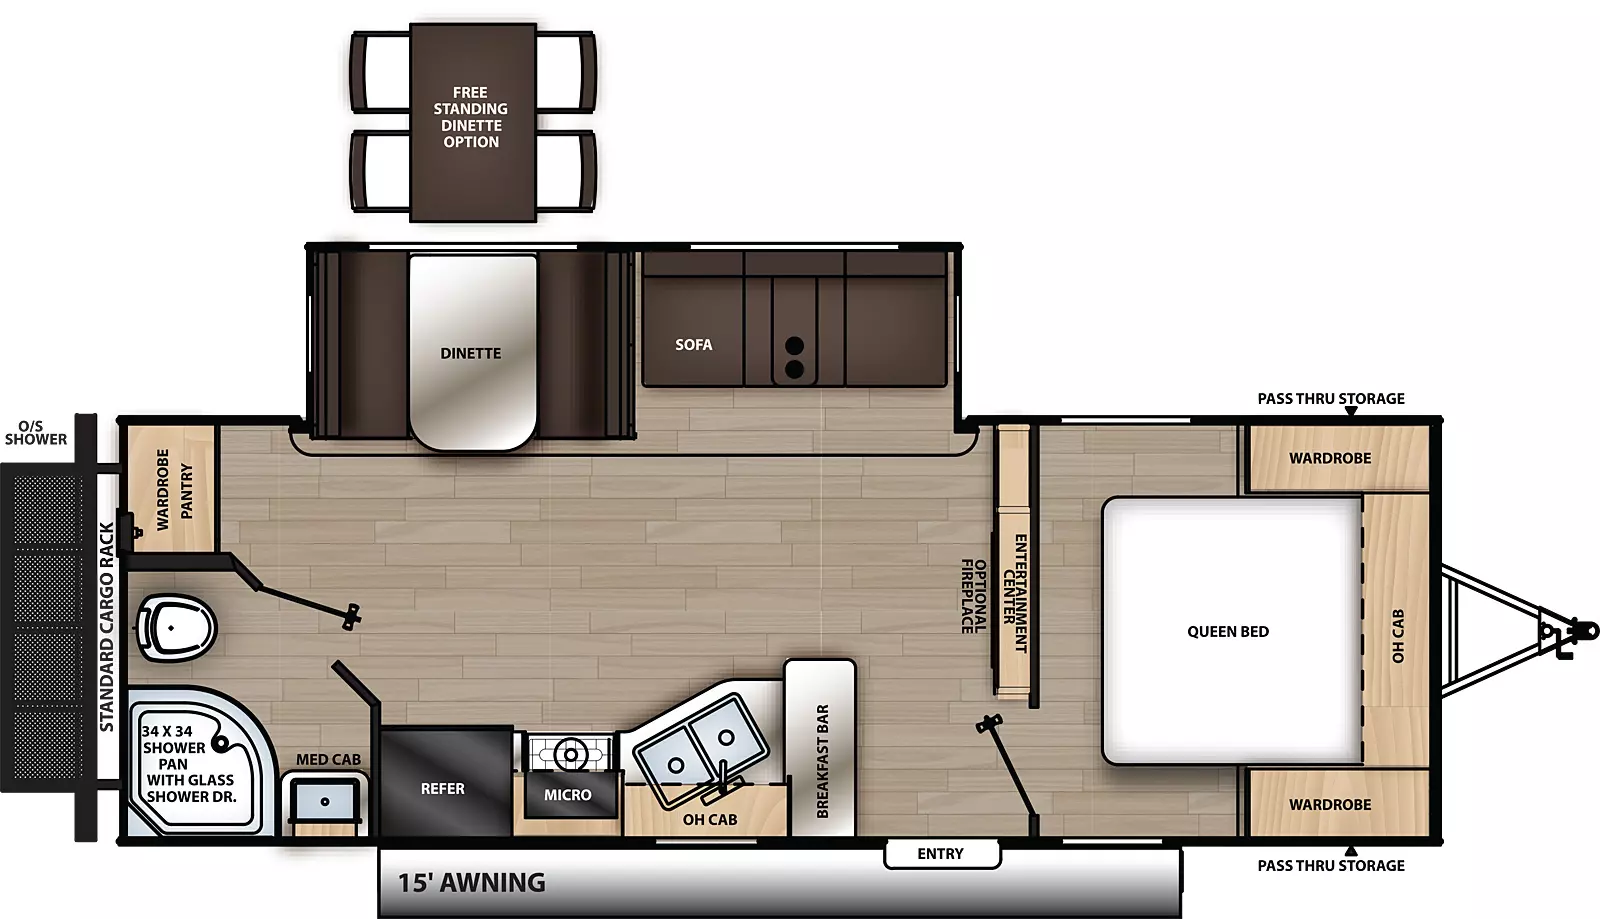 The 243RBS has one slide out and one entry. Exterior features a 15 foot awning, front pass-thru storage, outside shower, and rear cargo rack. Interior layout front to back: foot facing queen bed with overhead cabinet, and wardrobes on each side; entertainment center along inner wall; off-door side slide out with sofa and dinette; door side entry, breakfast bar, kitchen counter with sink, overhead cabinet, microwave, cooktop and refrigerator; door side full bathroom with medicine cabinet; off-door side rear pantry/wardrobe. Optional free standing dinette available in place of standard dinette. Optional fireplace available below entertainment center.